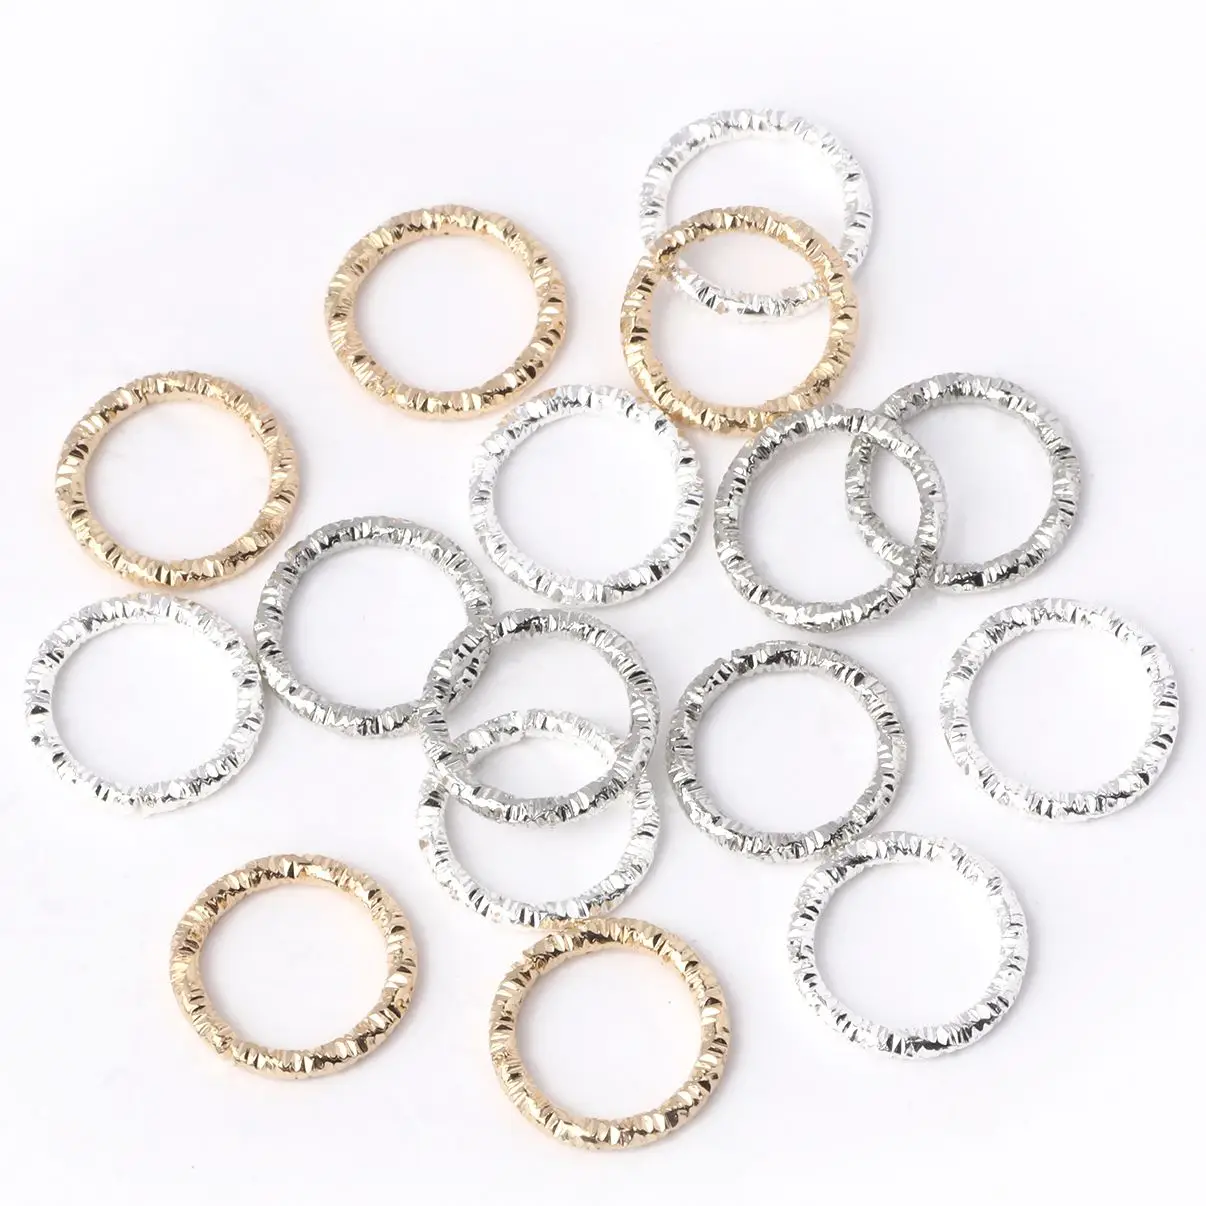 

Twisted Round Gold Silver Rhodium Color Jump Rings Split Rings Connectors For Bracelet Necklace Making Findings 12mm 50pcs/lot